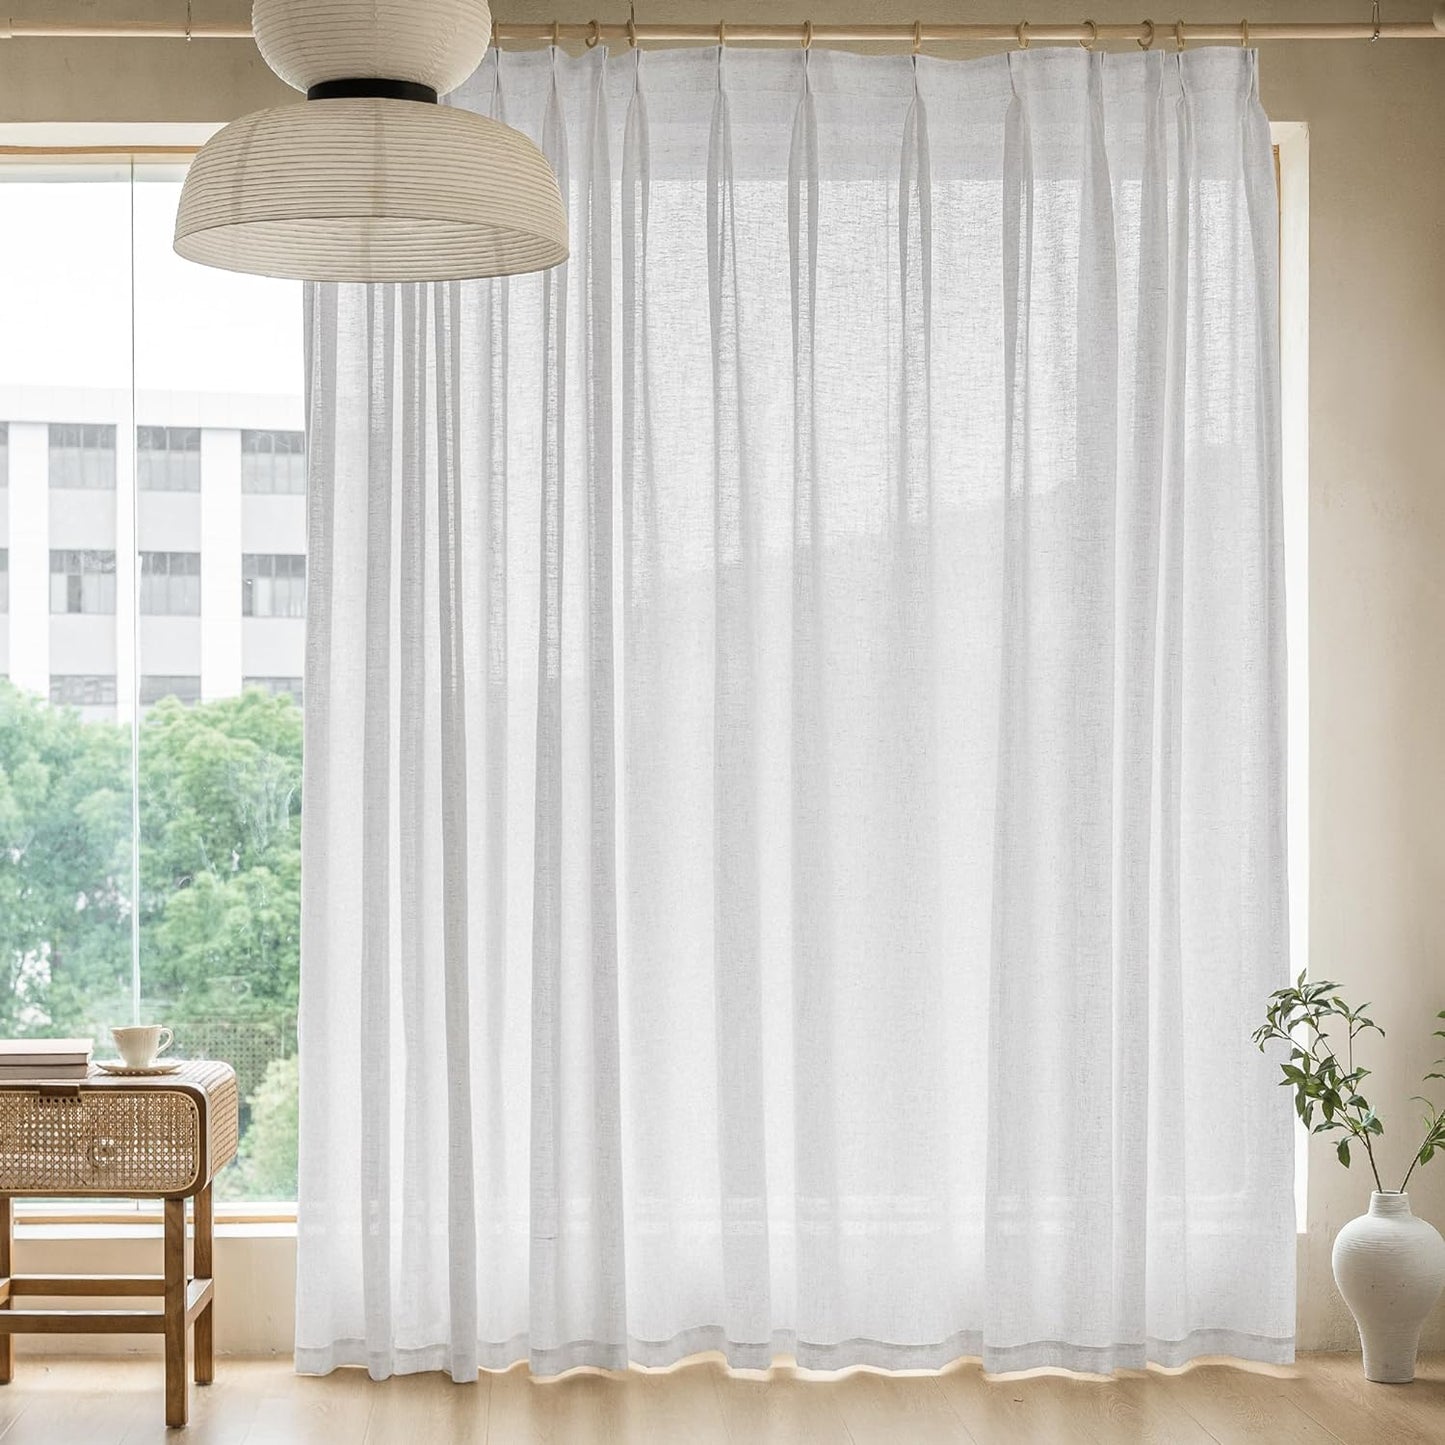 MAIHER Extra Wide Pinch Pleated Drapes 108 Inches Long, Faux Linen Light Filtering Semi Sheer Curtains with Hooks for Living Room Bedroom, Natural Linen (1 Panel, 100 W X 108 L)  MAIHER Beige White 100X108 